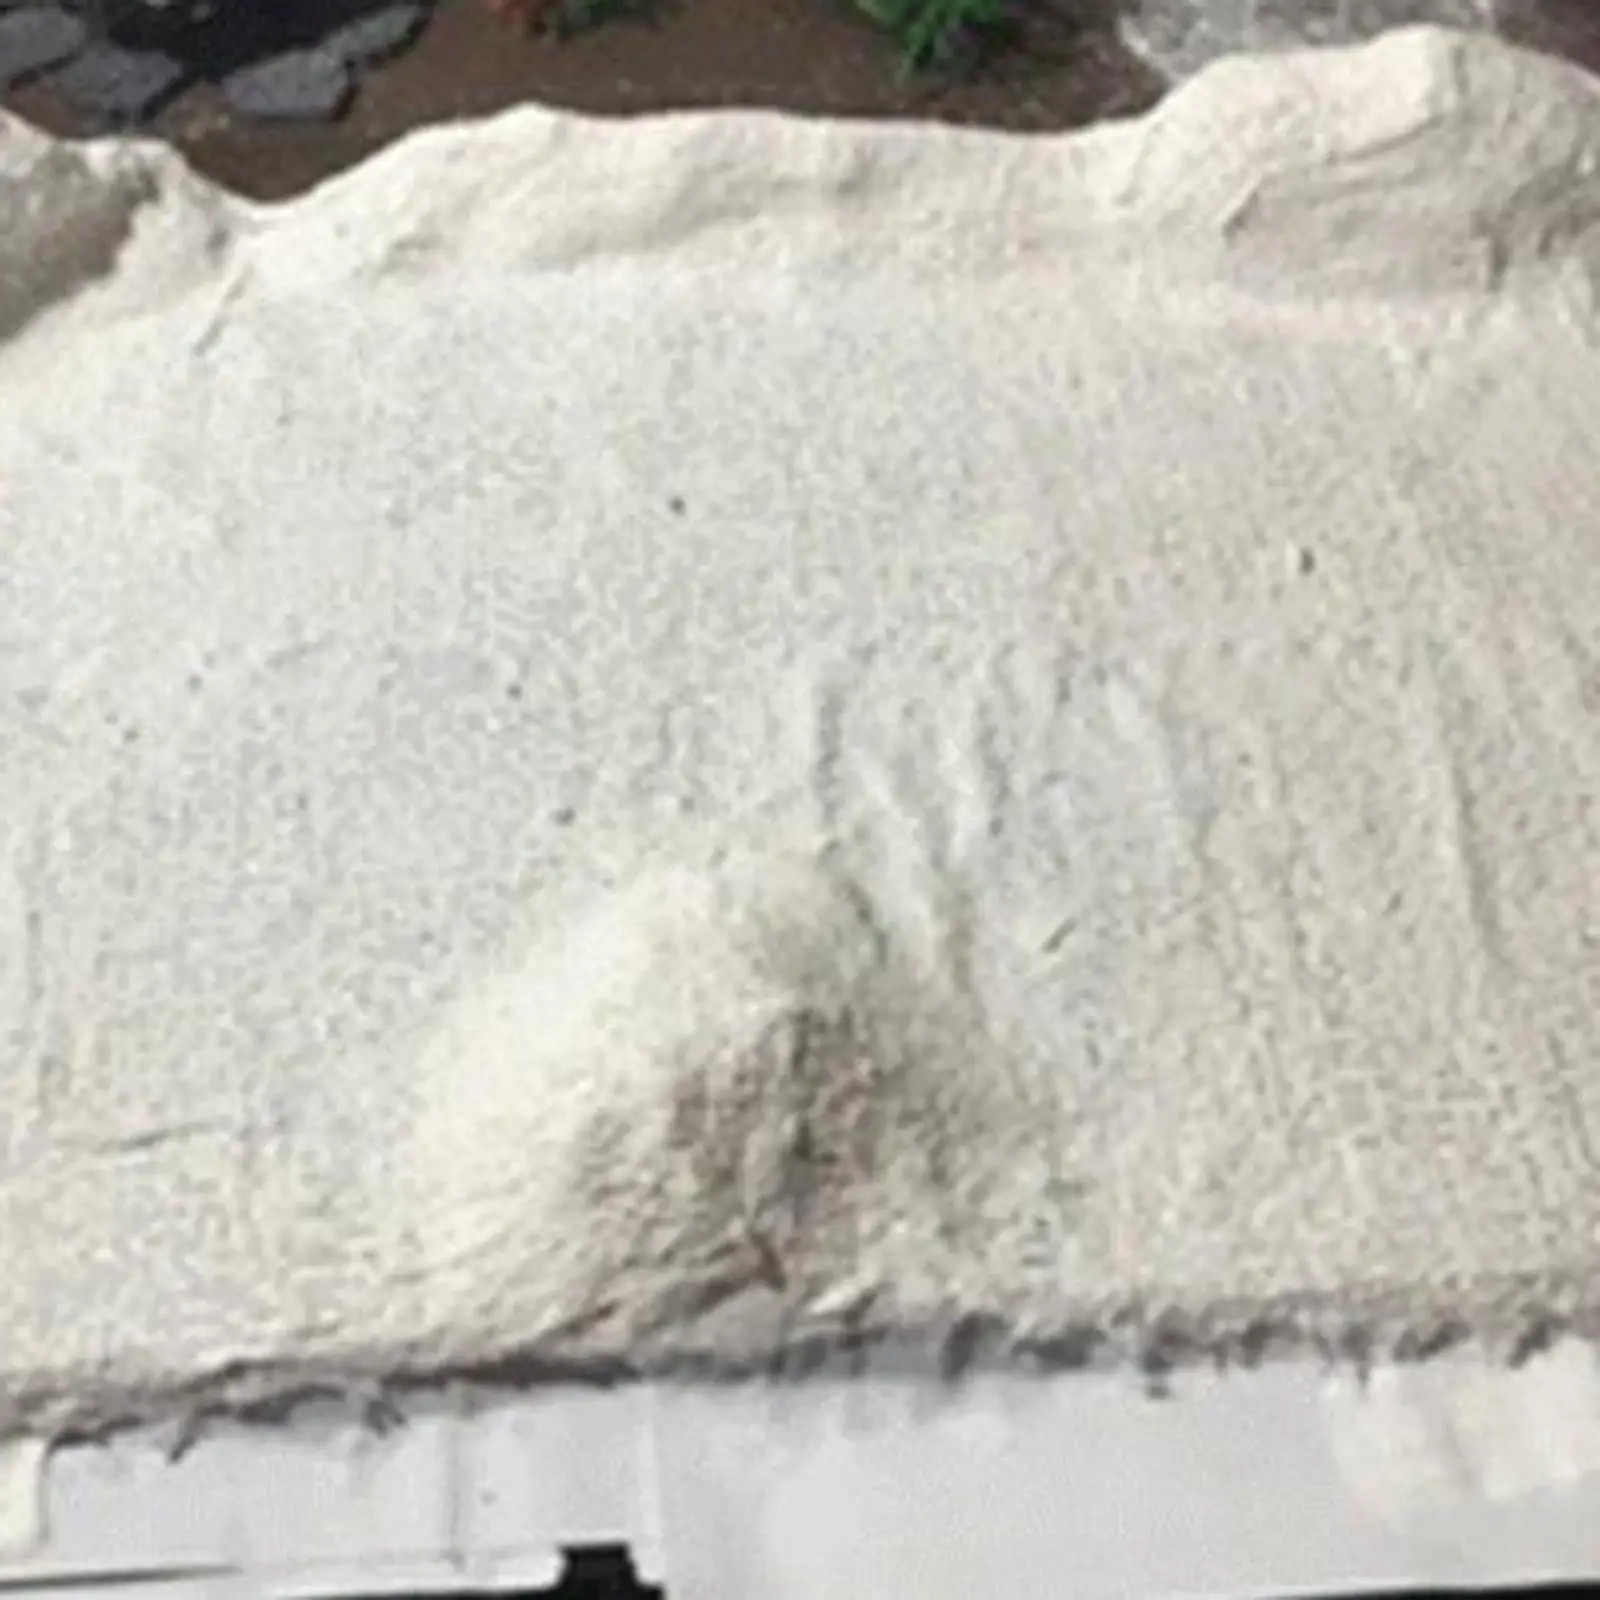 Plaster Cloth Gauze Cast Material for Railway Layout Casting Model Trains